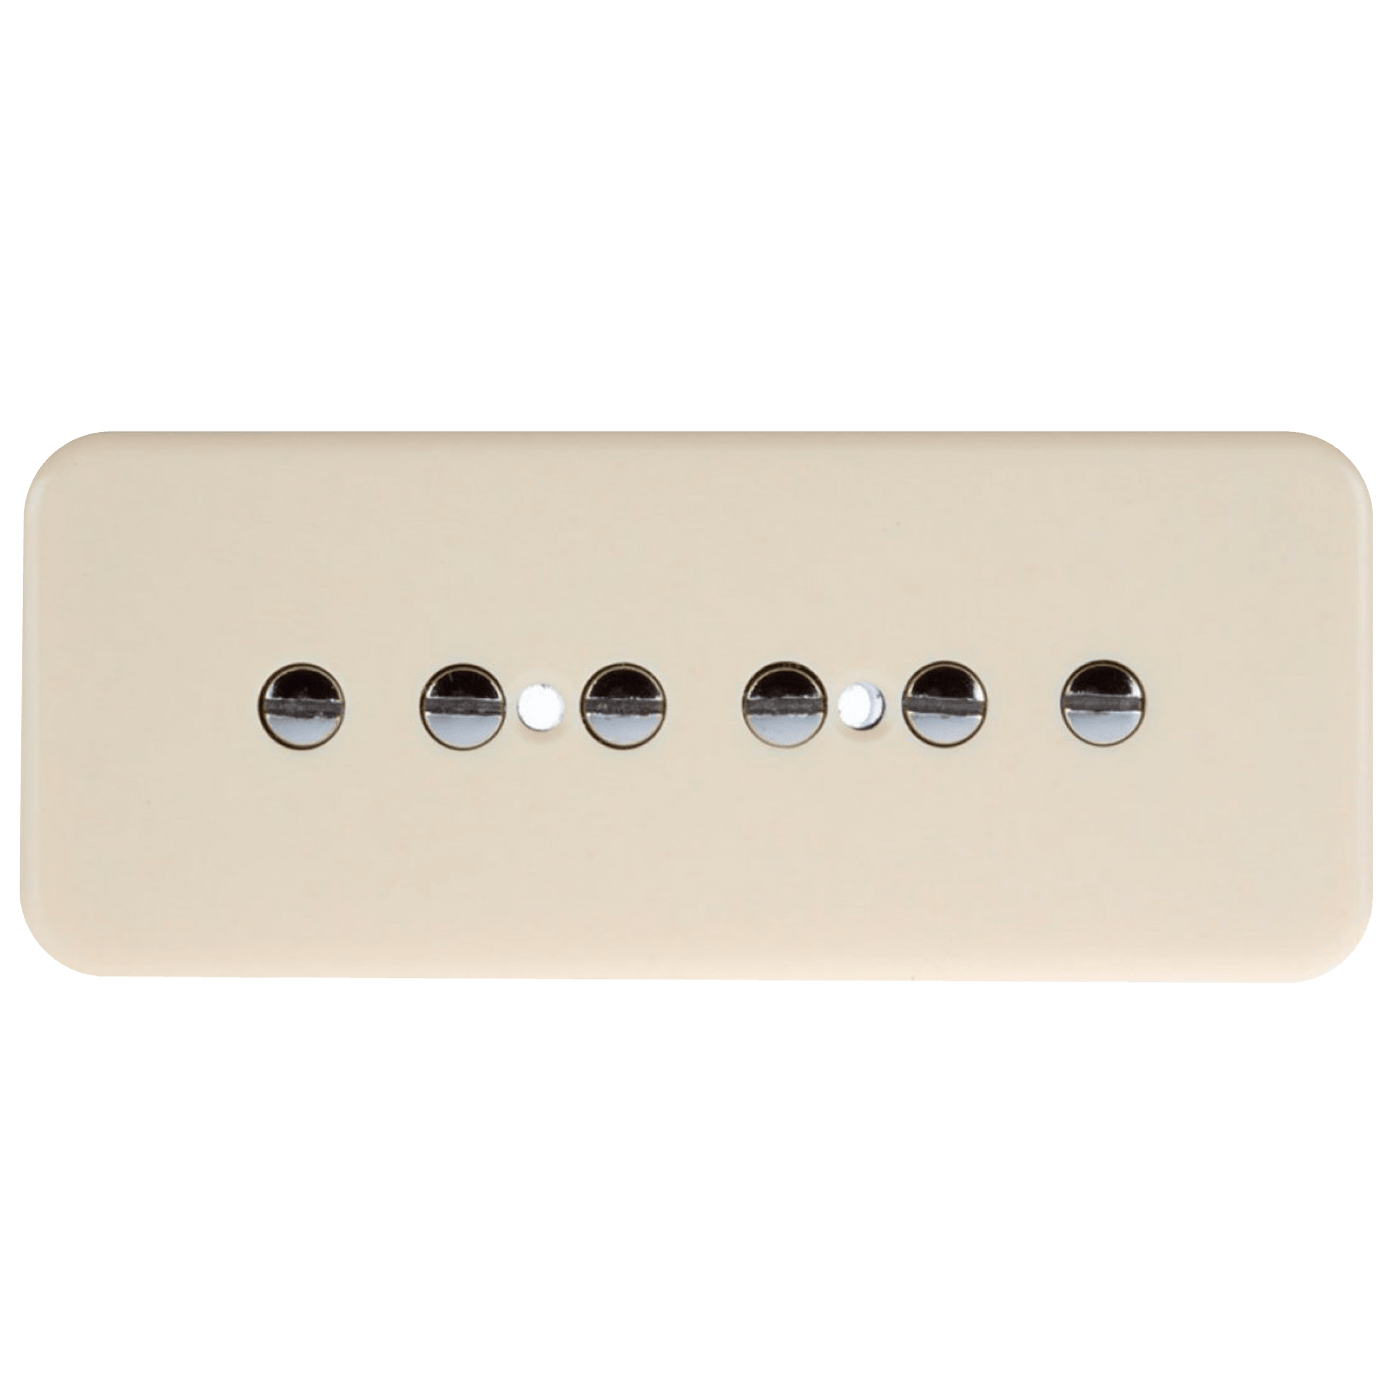 Suhr S90 Cream (Middle) - $169990 - Gearhub - “We are happy to introduce the new Thornbucker + bridge pickup. It retains all the clarity, warmth, character, and mojo of the original Thornbuckers, and adds a bit more power and oomph. Great for players that like a slightly overwound PAF-type tone!”. “We’re overjoyed with the enthusiasm from players for the Thornbucker humbucking pickups! The pickups have been a resounding success, garnering praise for their extraordinary tone and balance. I’m truly honored an